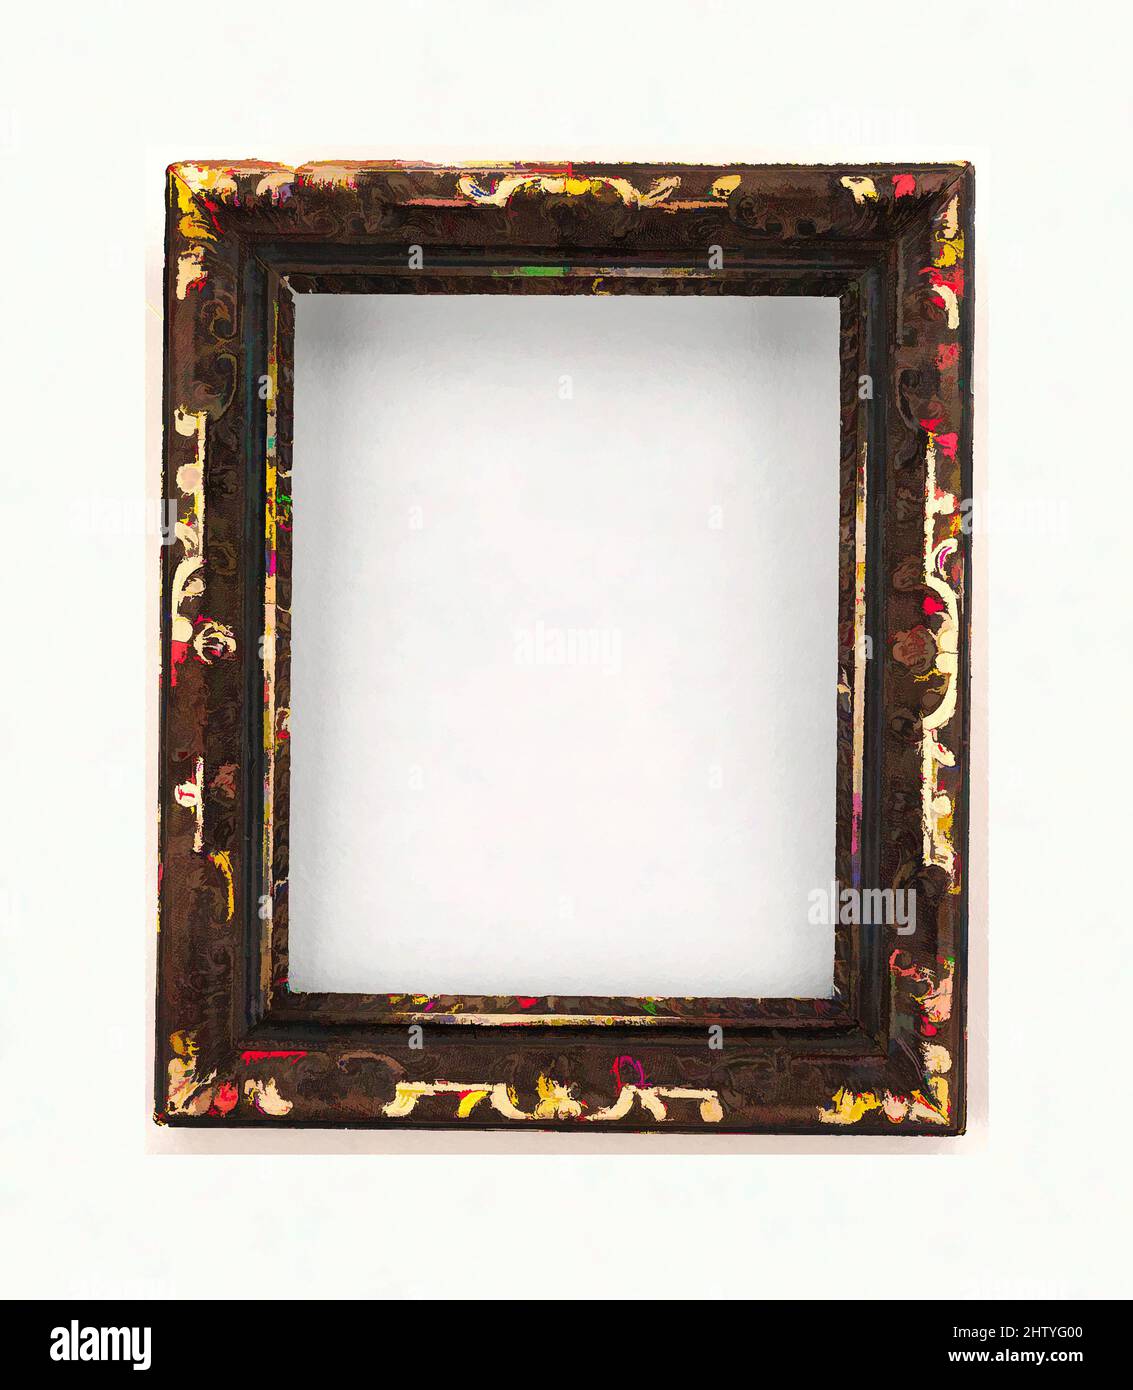 Art inspired by Queen Anne frame, ca. 1720, British, Lime; beech feather keys., 30.4 x 25.5, 22 x 17.3, 24 x 19.2 cm., Frames, Classic works modernized by Artotop with a splash of modernity. Shapes, color and value, eye-catching visual impact on art. Emotions through freedom of artworks in a contemporary way. A timeless message pursuing a wildly creative new direction. Artists turning to the digital medium and creating the Artotop NFT Stock Photo